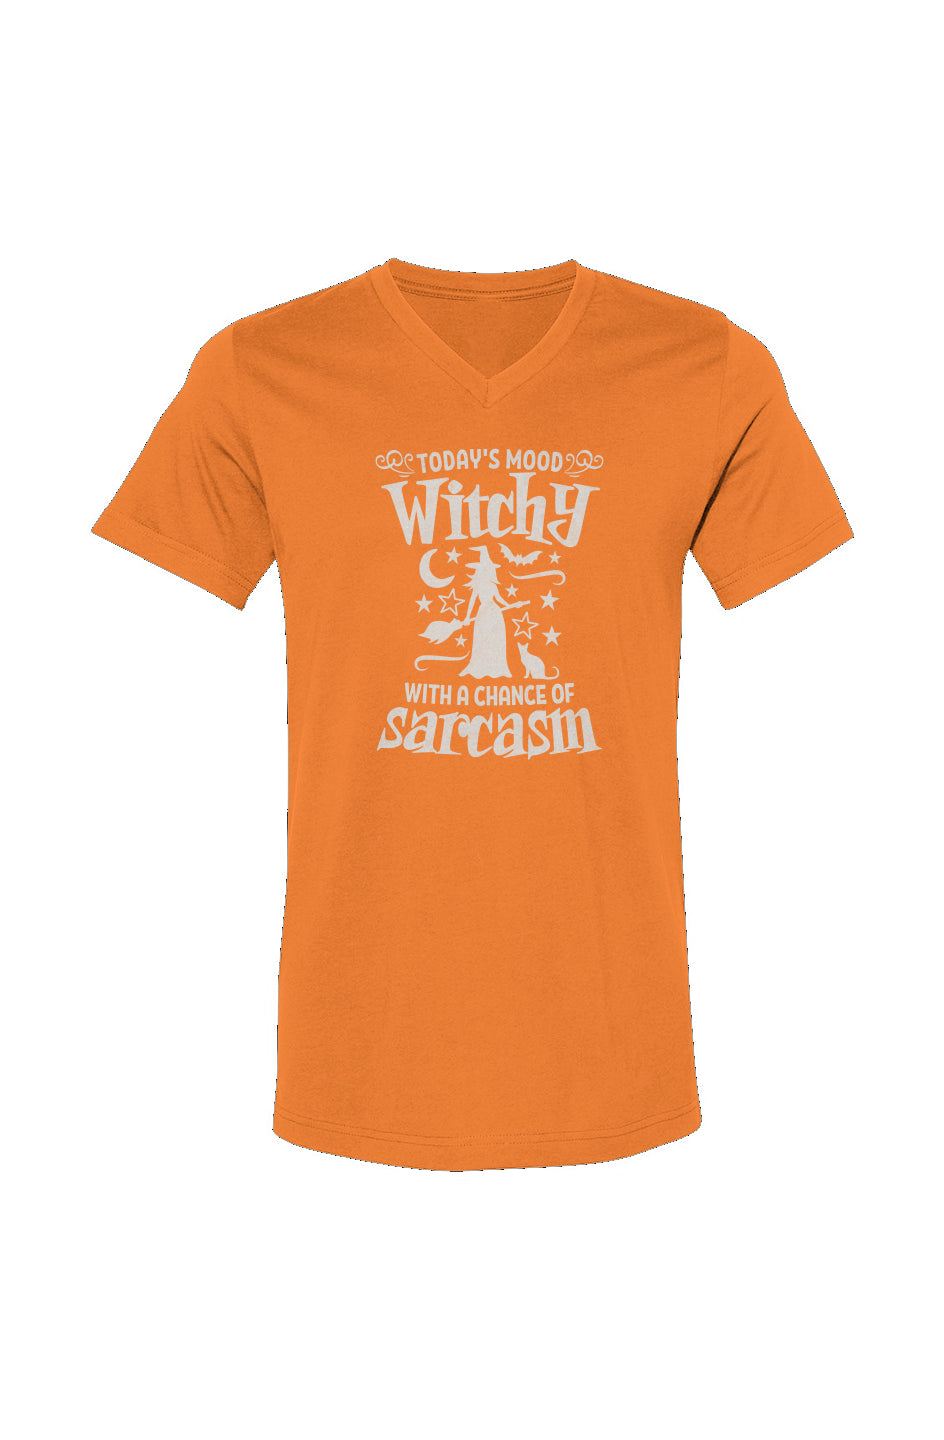 "Witchy With A Chance Of Sarcasm" Unisex Fit